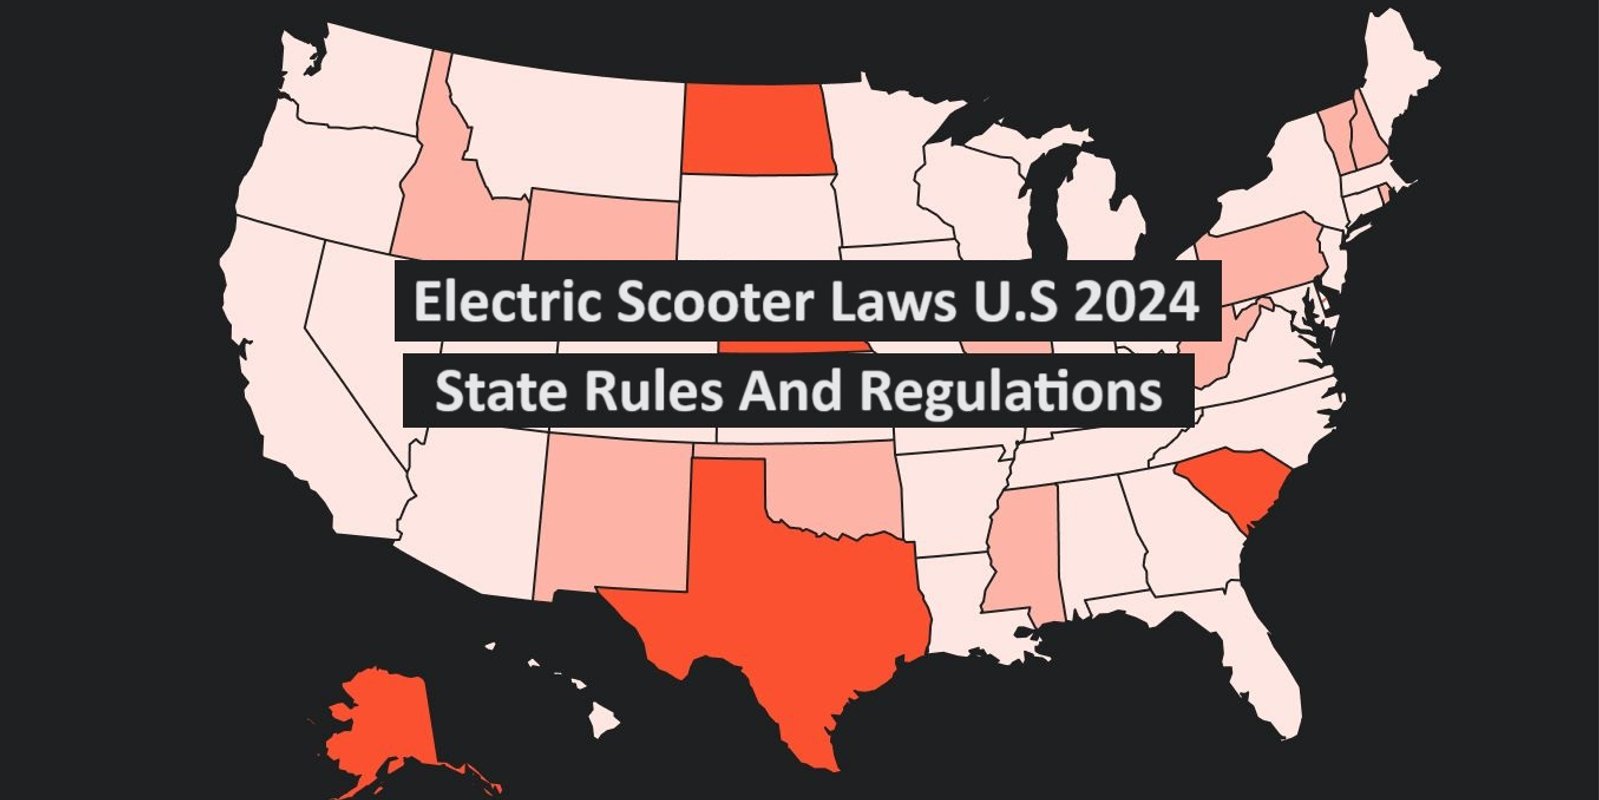 Electric Scooter Laws U.S 2024: State Rules And Regulations